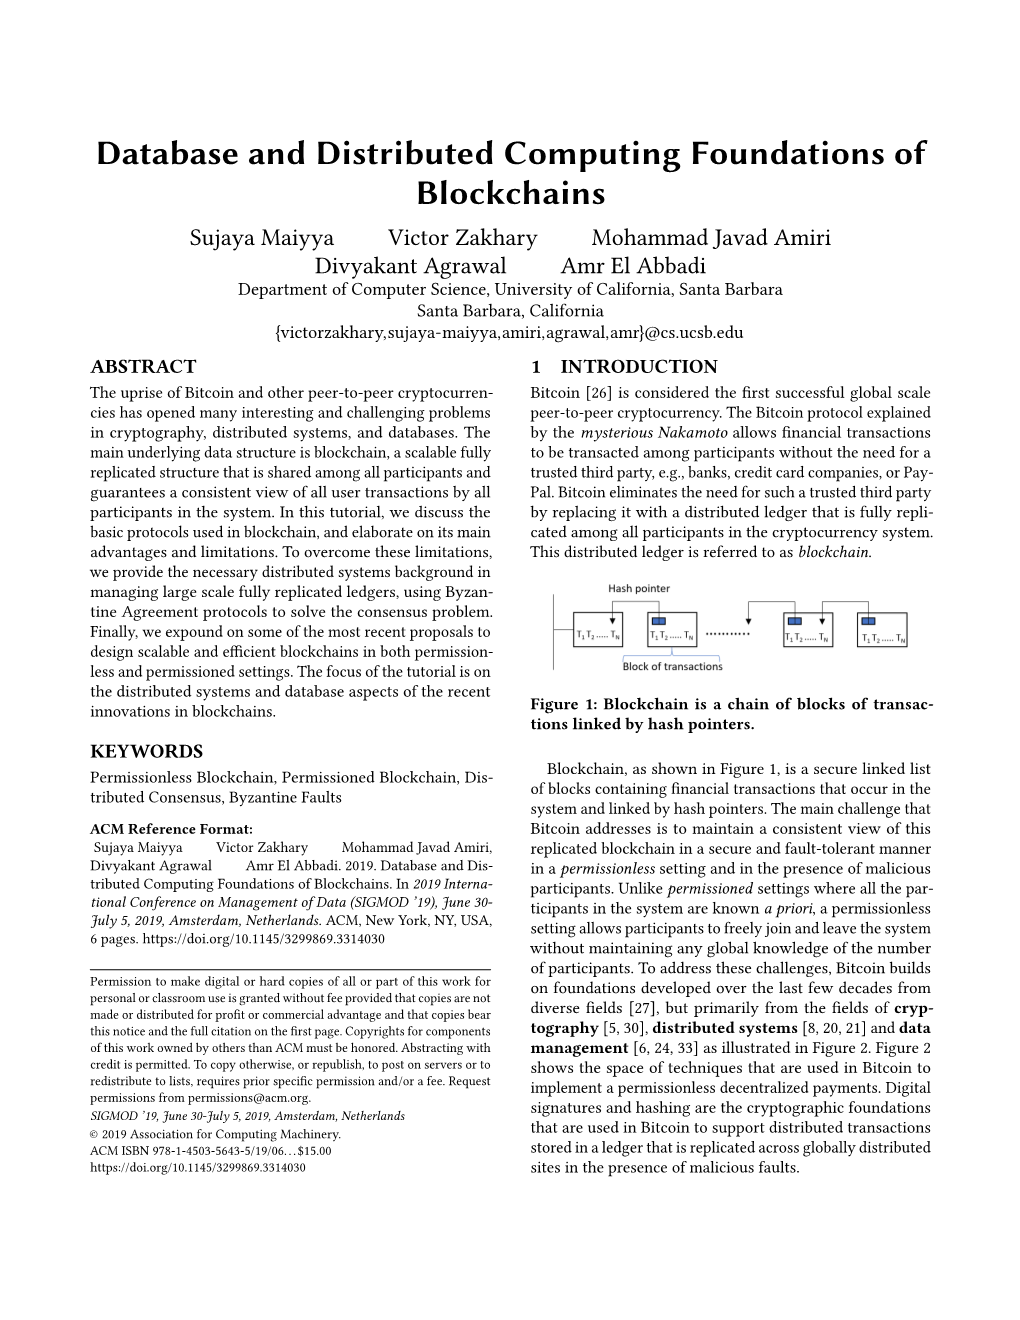 Database and Distributed Computing Foundations of Blockchains